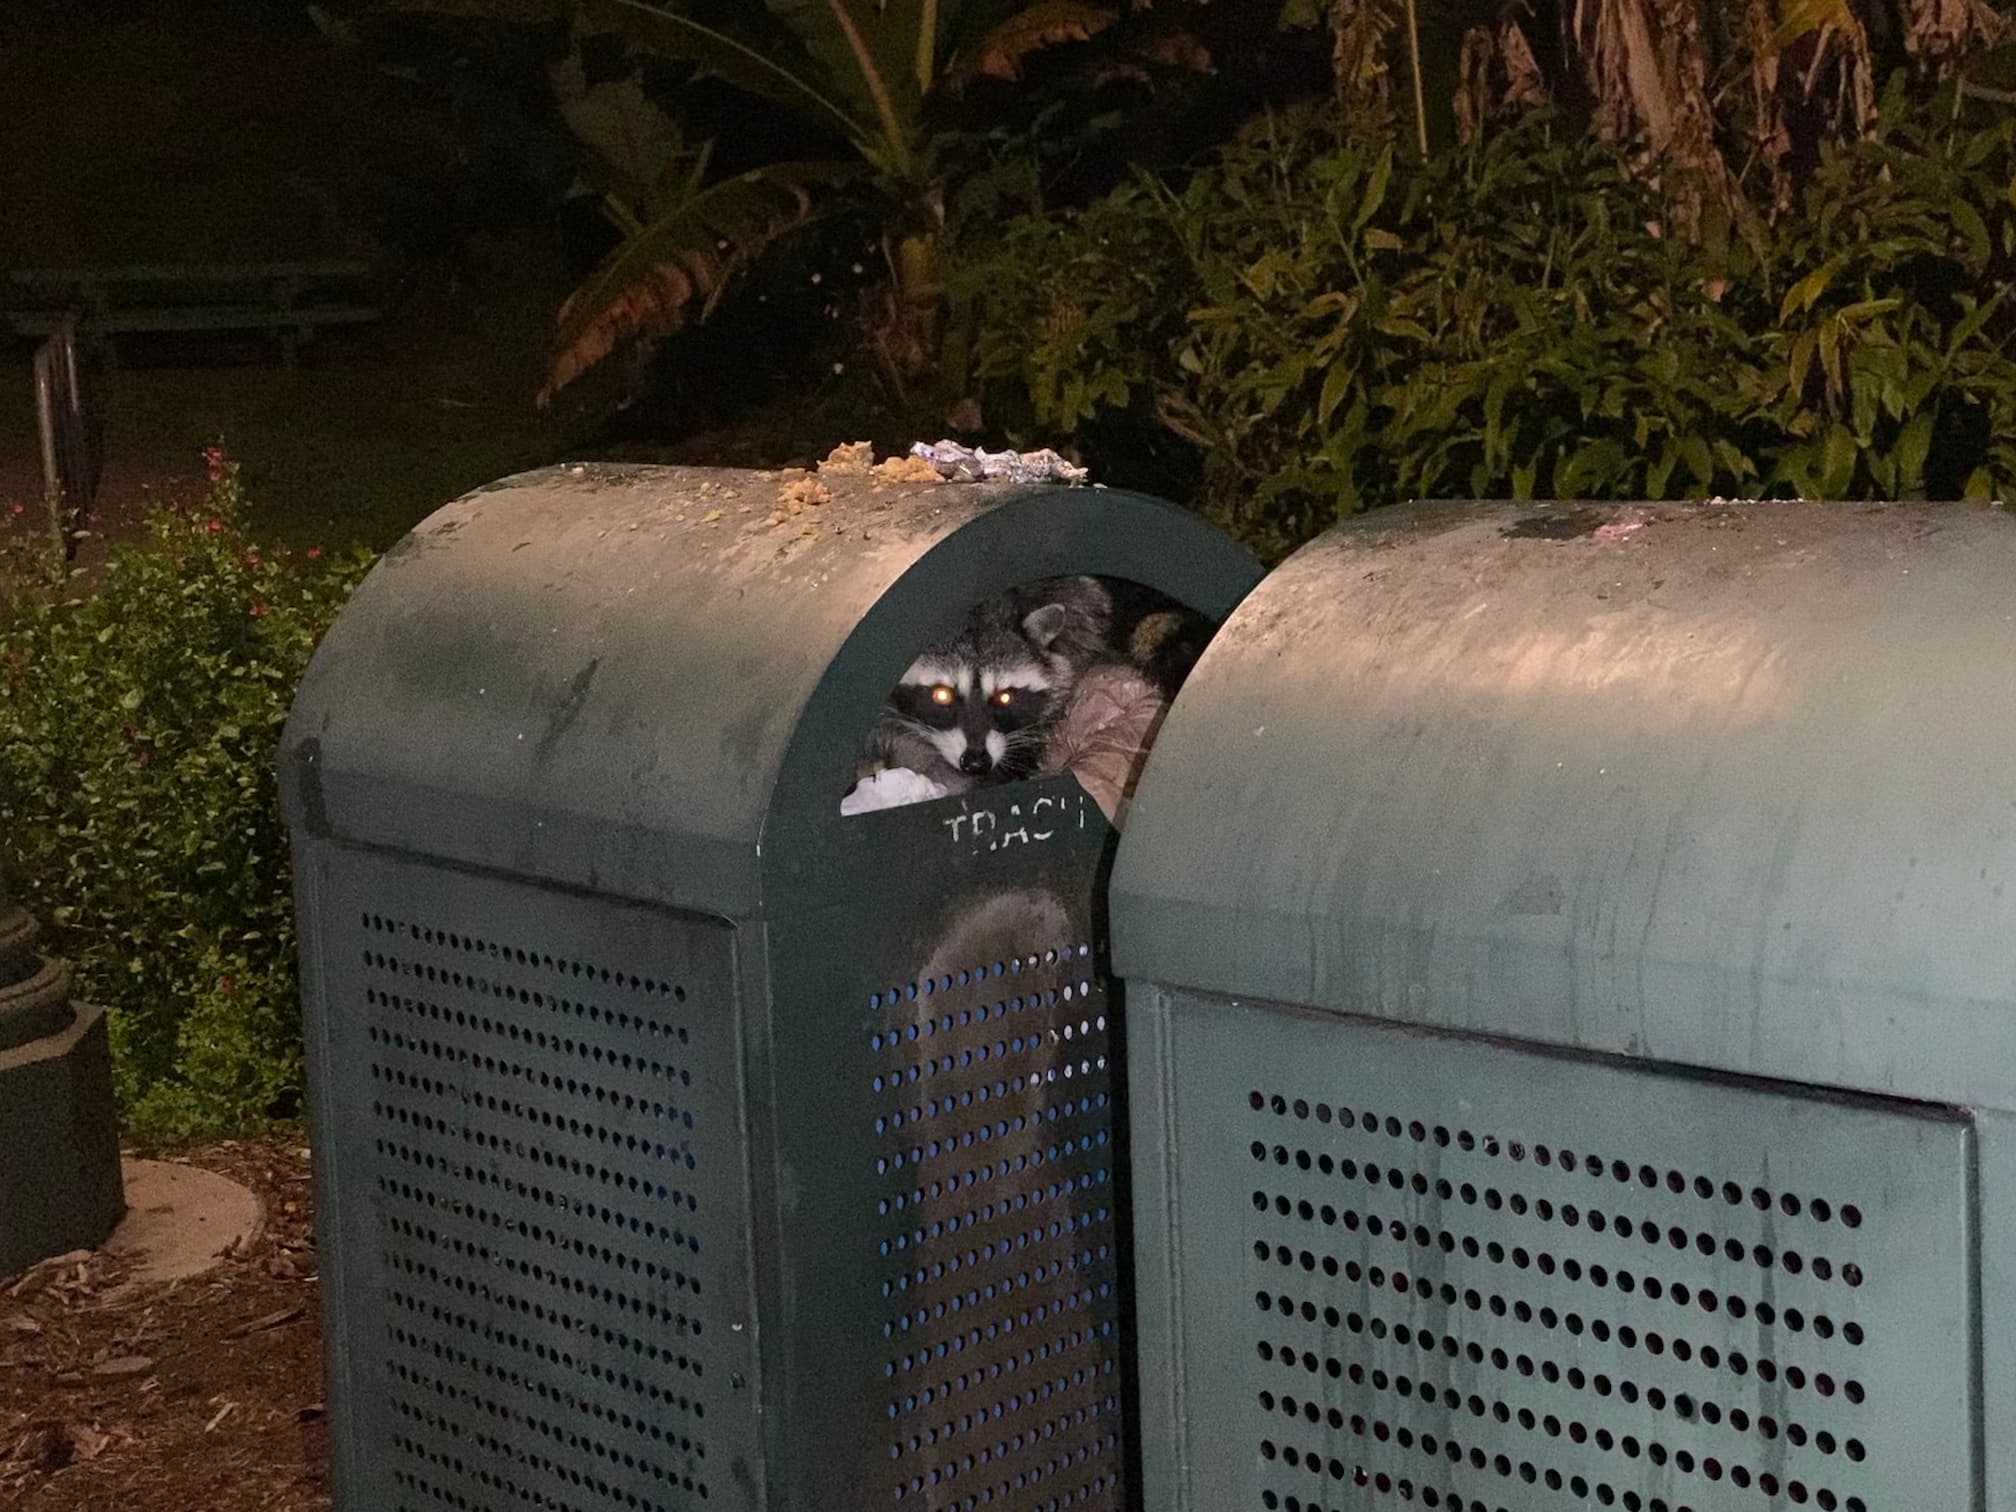 A night time blurry photo of a Raccoon in a trash can. A stencilled label on the bin below the raccoon's face says TRASH